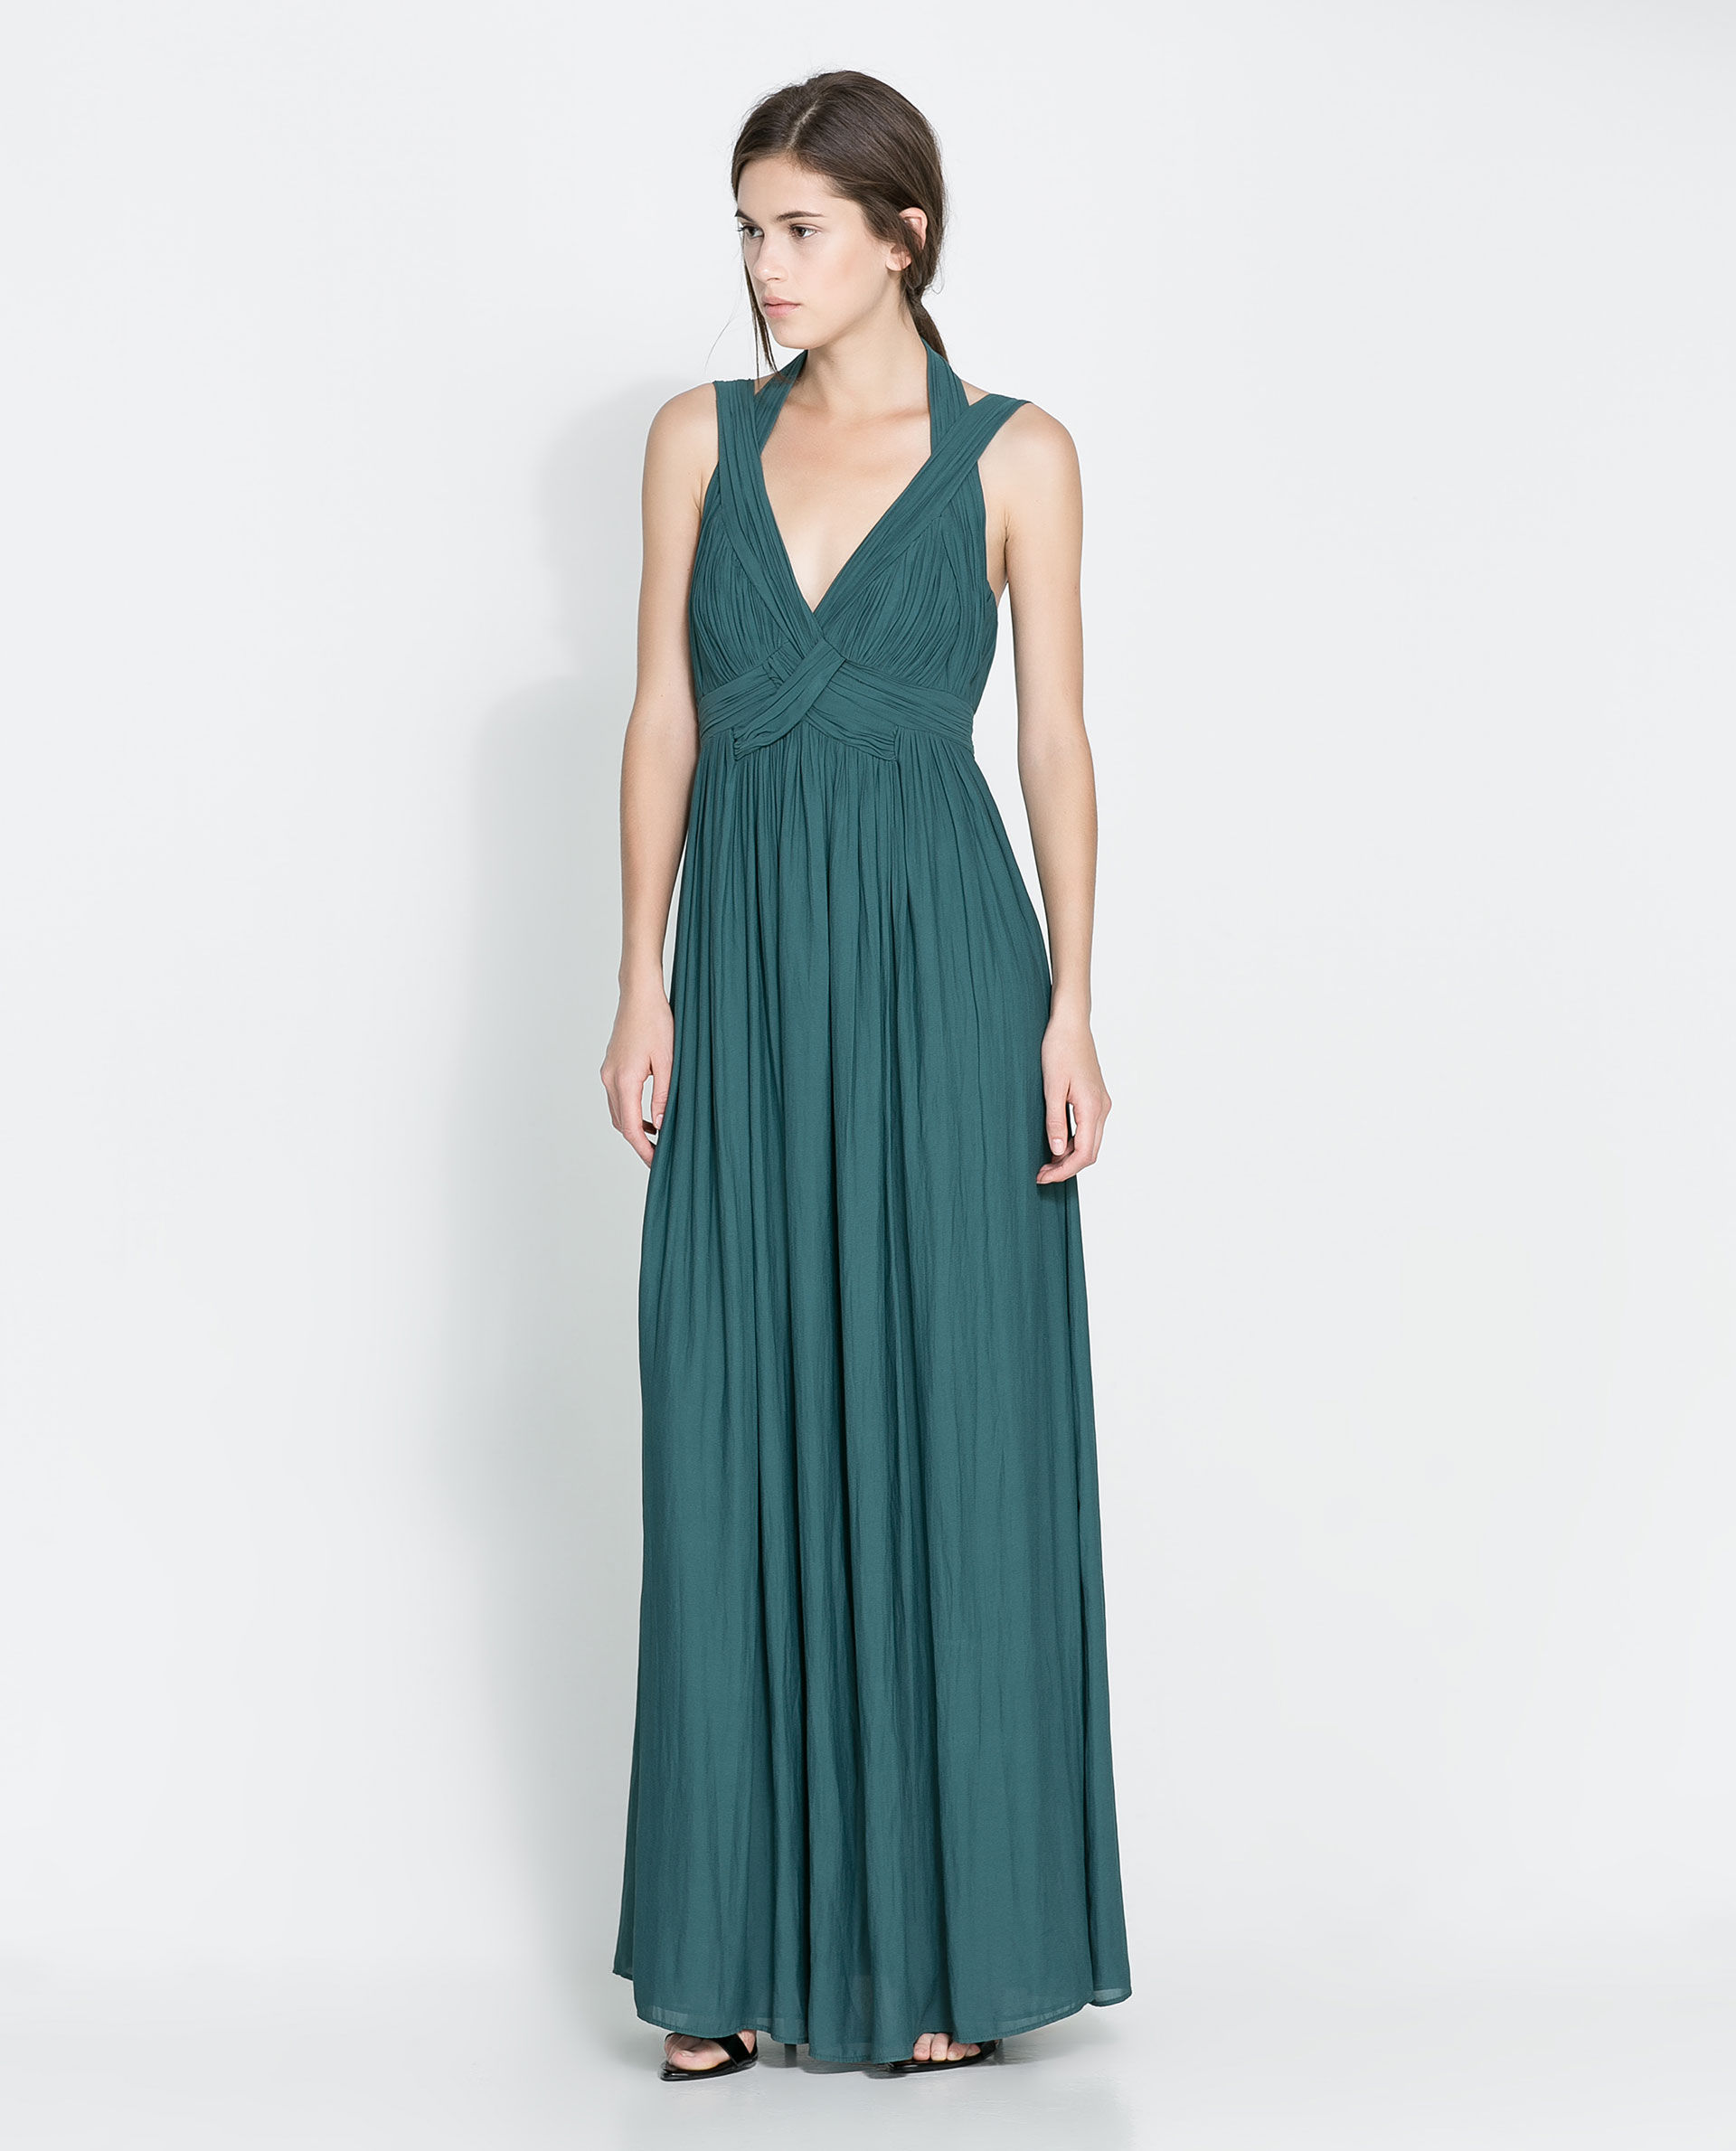 Long Dress Styles For Short Ladies : Things To Know